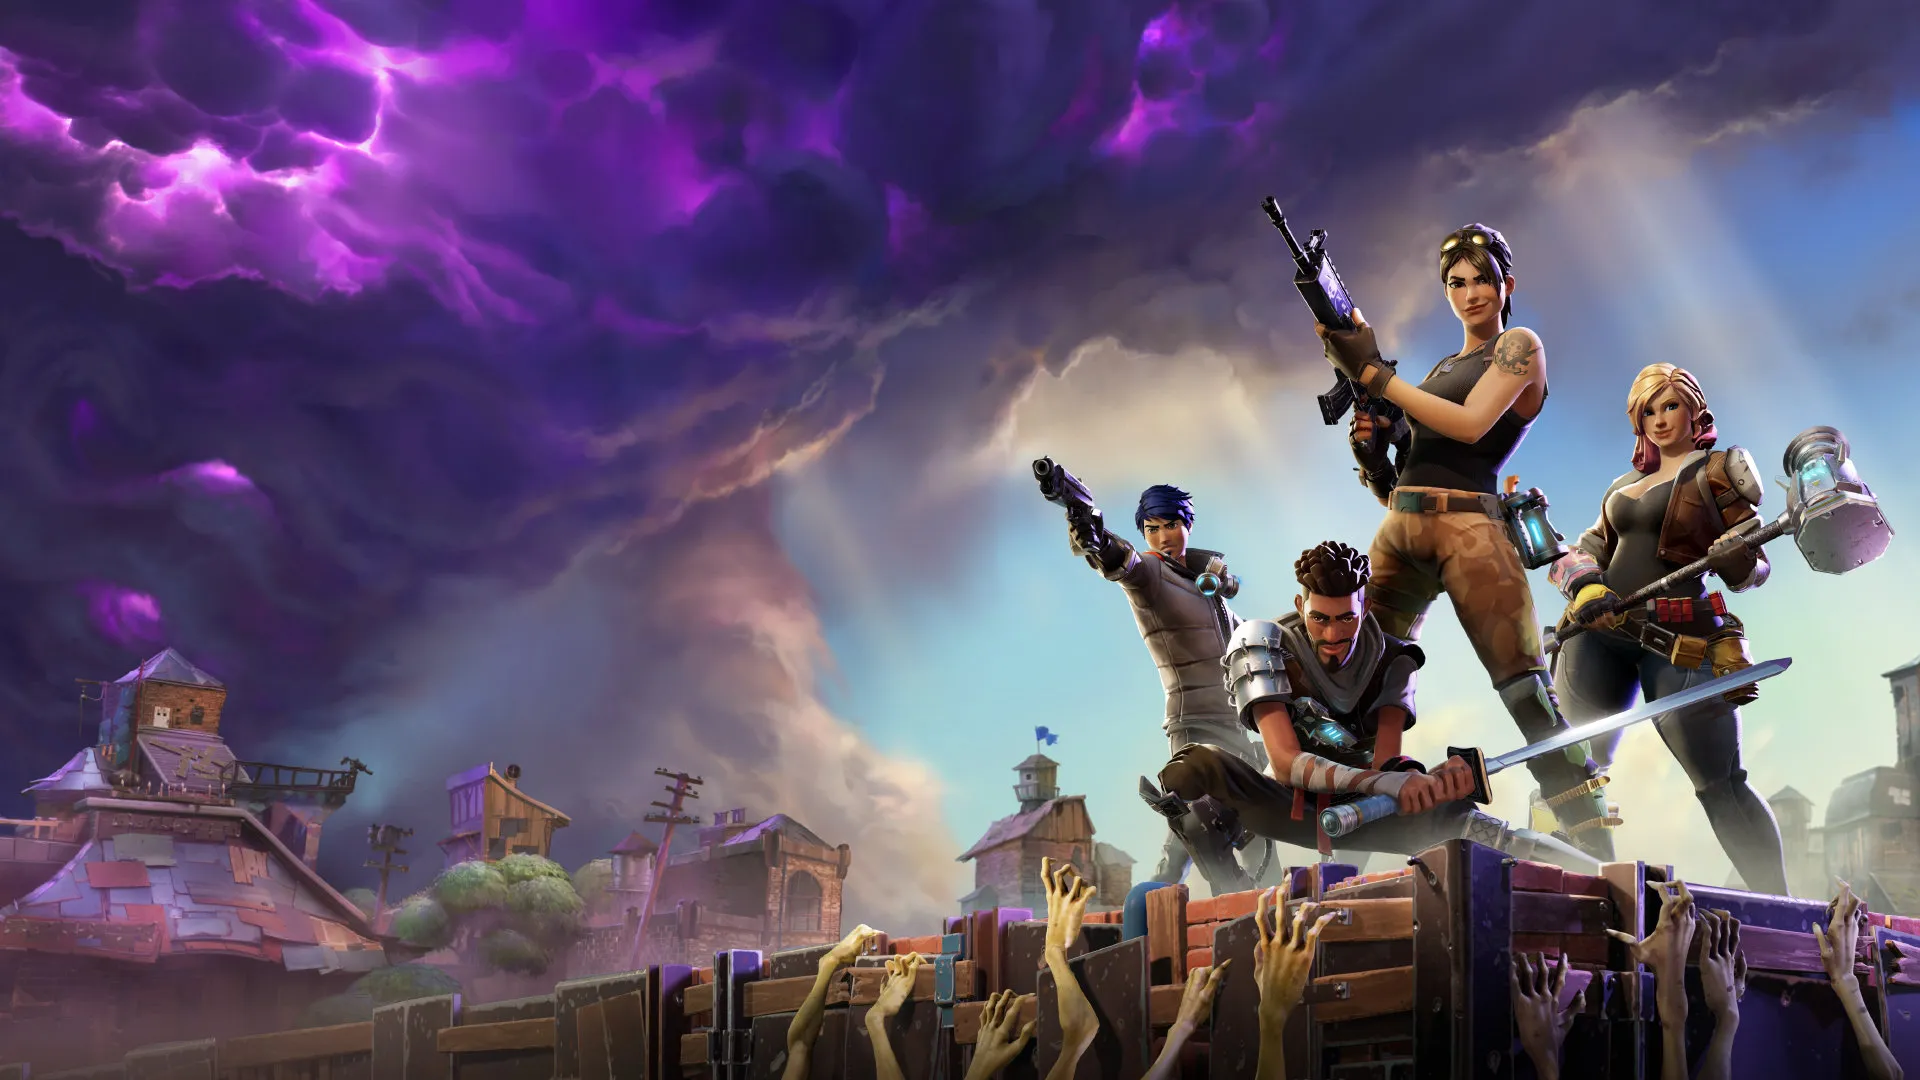 The online game Fortnite to help find a definition of the metaverse